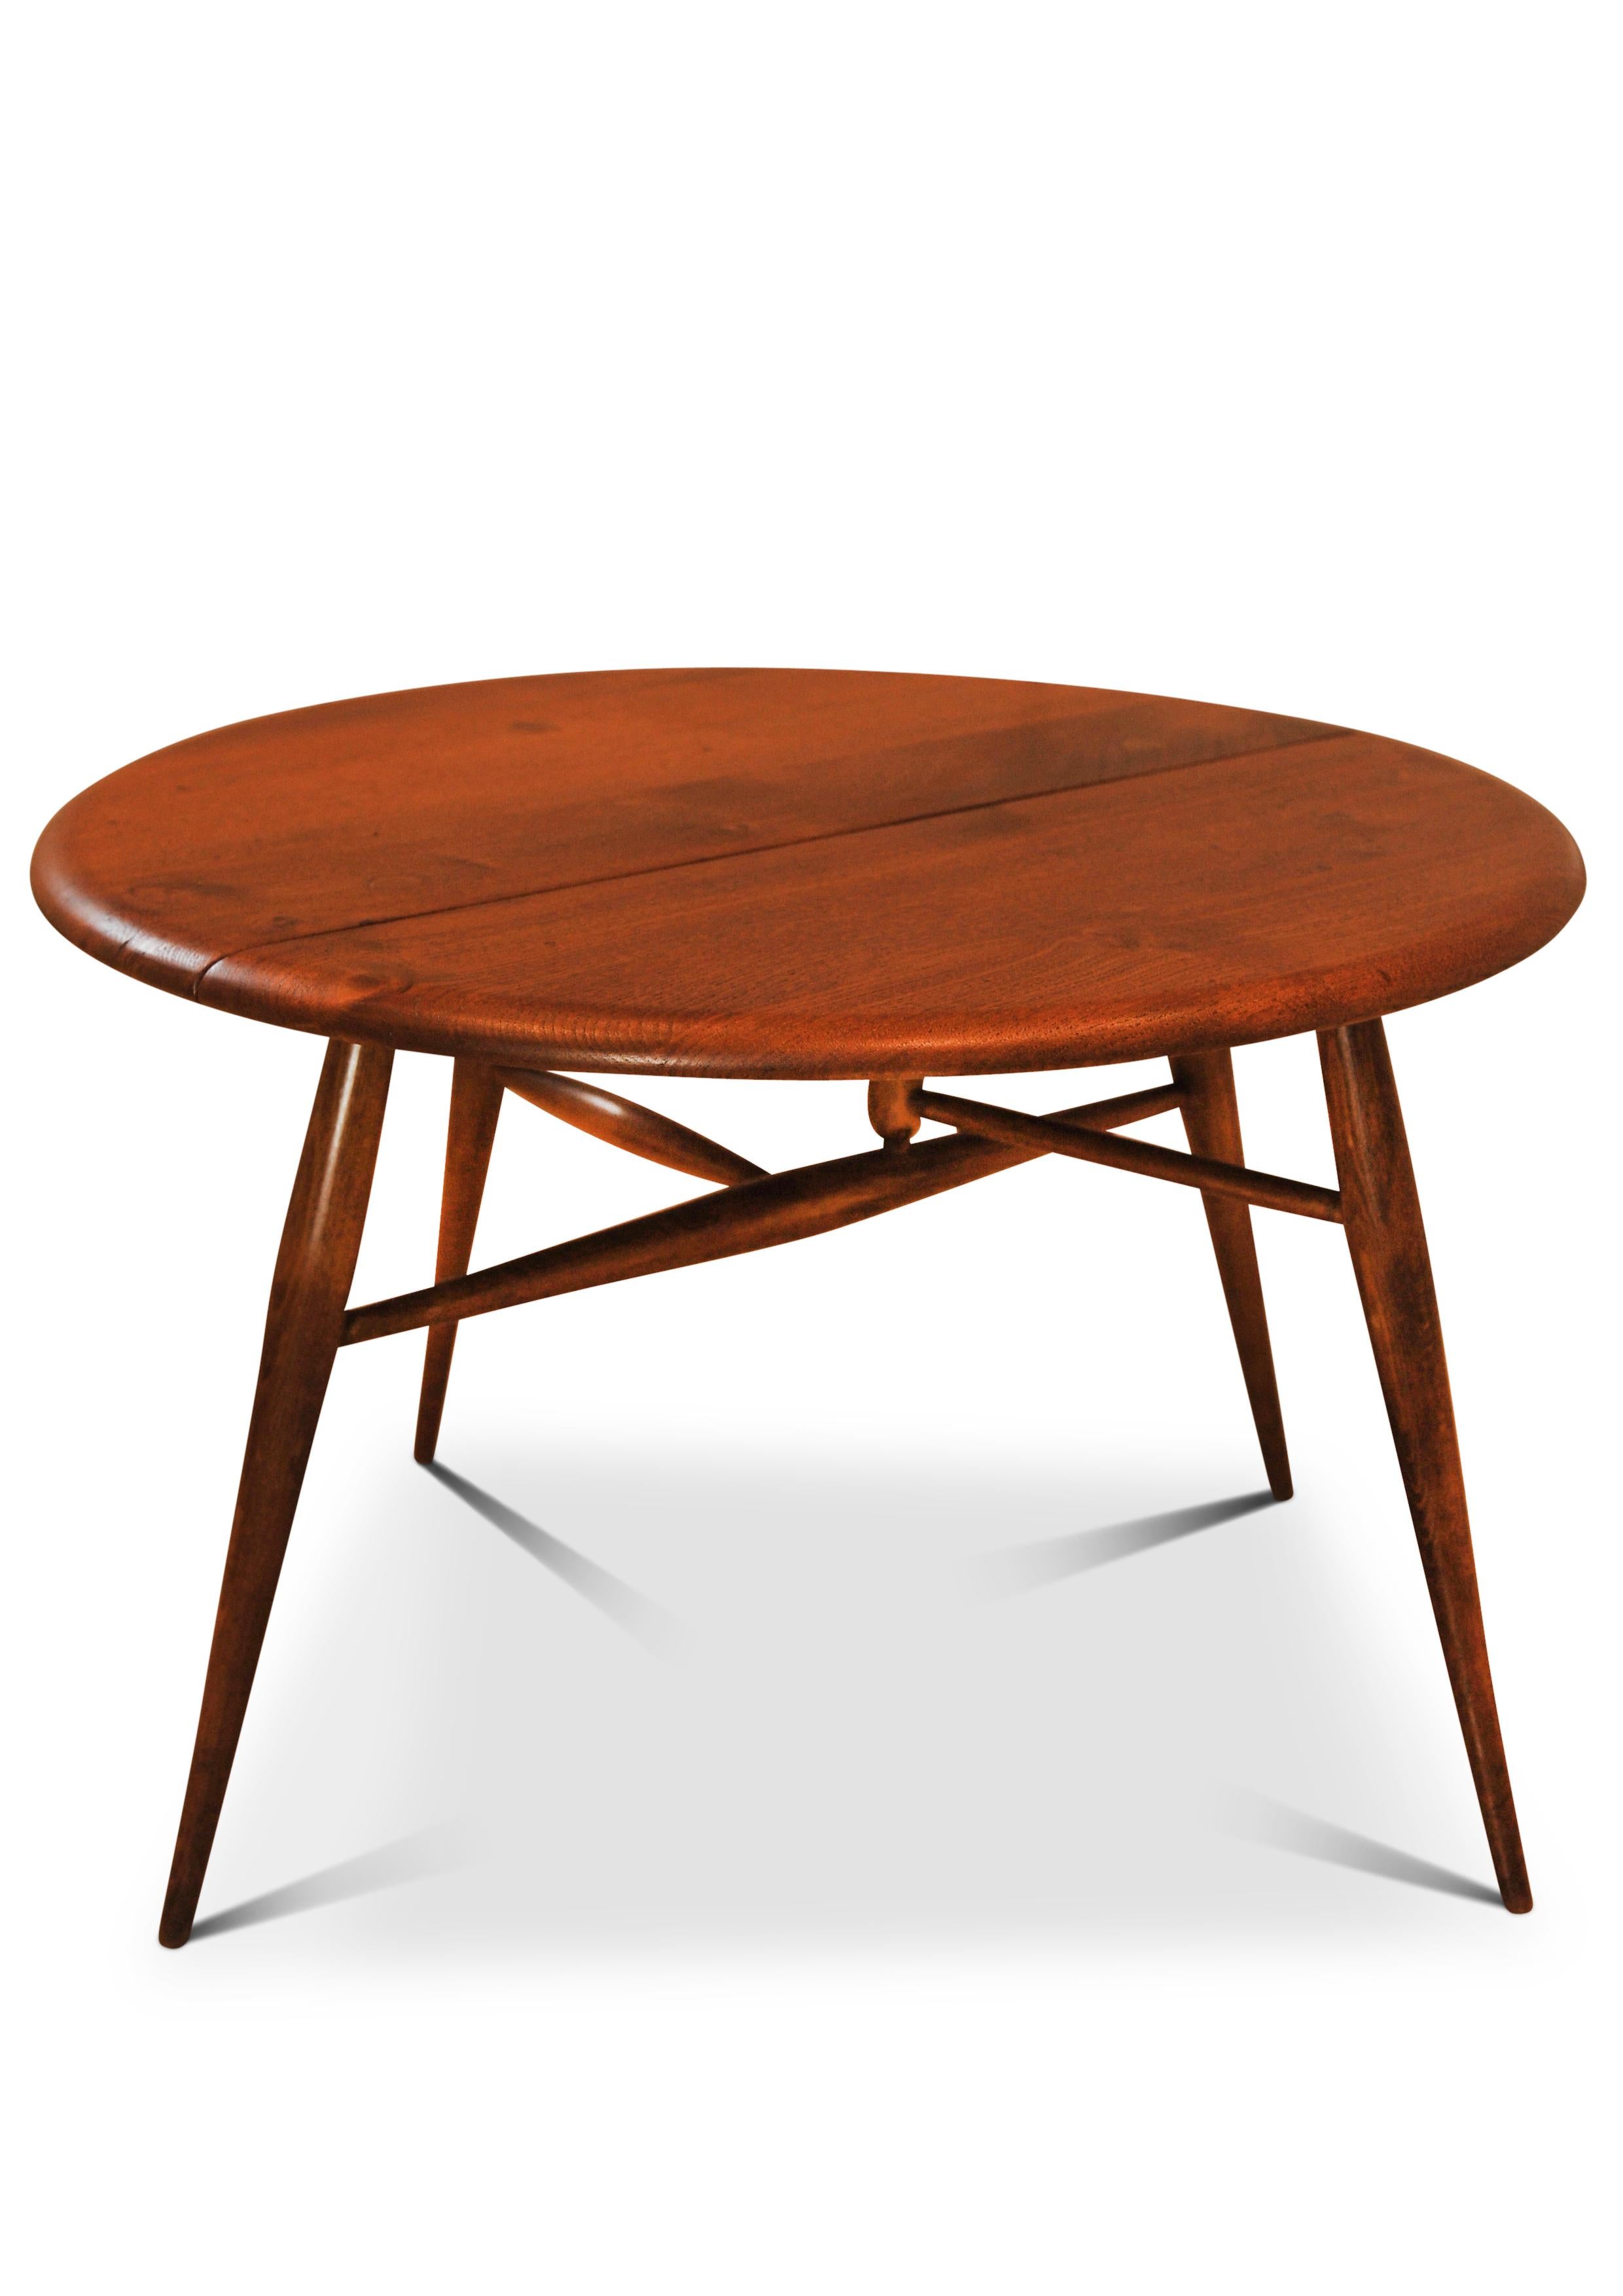 Hand-Crafted English Mid Century Hand Crafted Ercol Elm Drop Leaf Coffee Lounge Table. For Sale